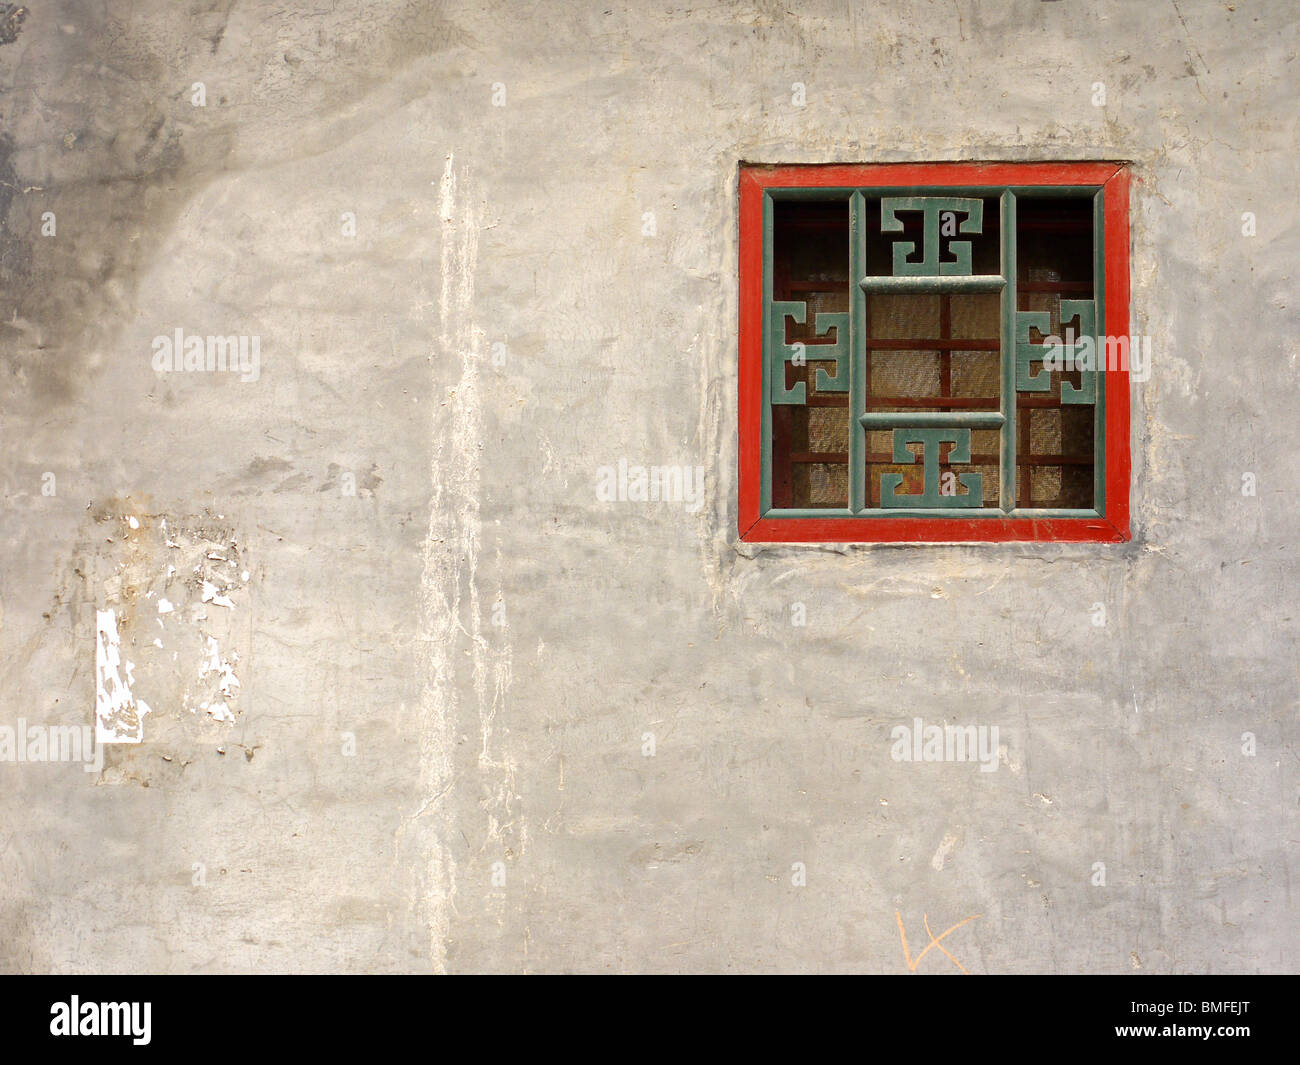 Small traditionally ornate square fan window on the house wall in hutongs, Beijing, China Stock Photo